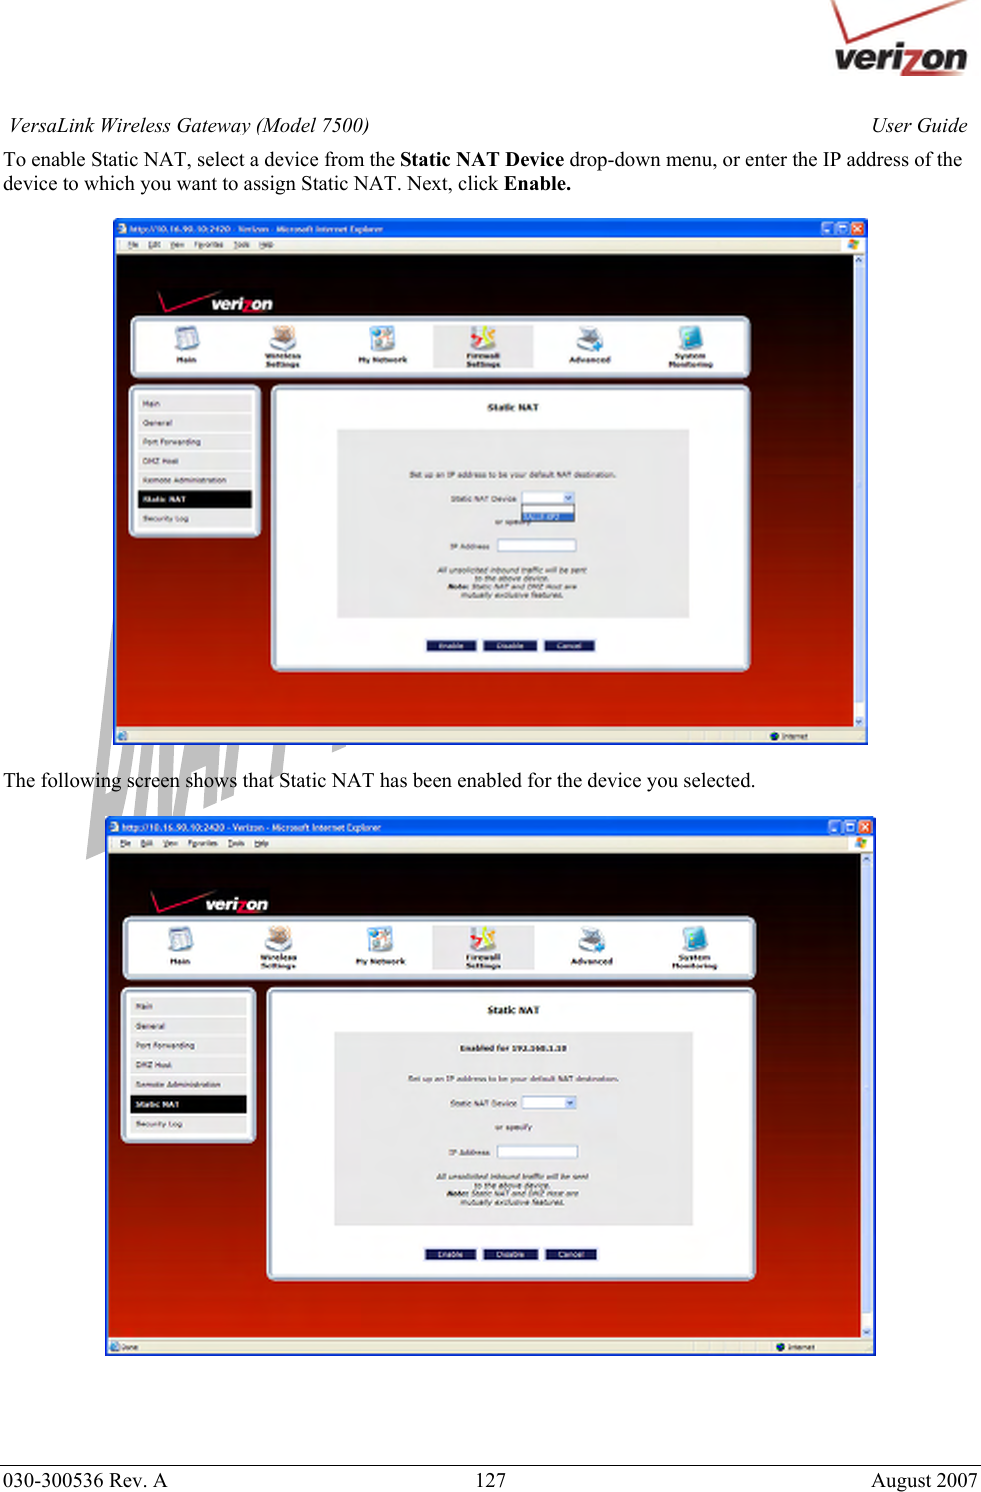       030-300536 Rev. A  127       August 2007 User GuideVersaLink Wireless Gateway (Model 7500)To enable Static NAT, select a device from the Static NAT Device drop-down menu, or enter the IP address of the device to which you want to assign Static NAT. Next, click Enable.    The following screen shows that Static NAT has been enabled for the device you selected.       